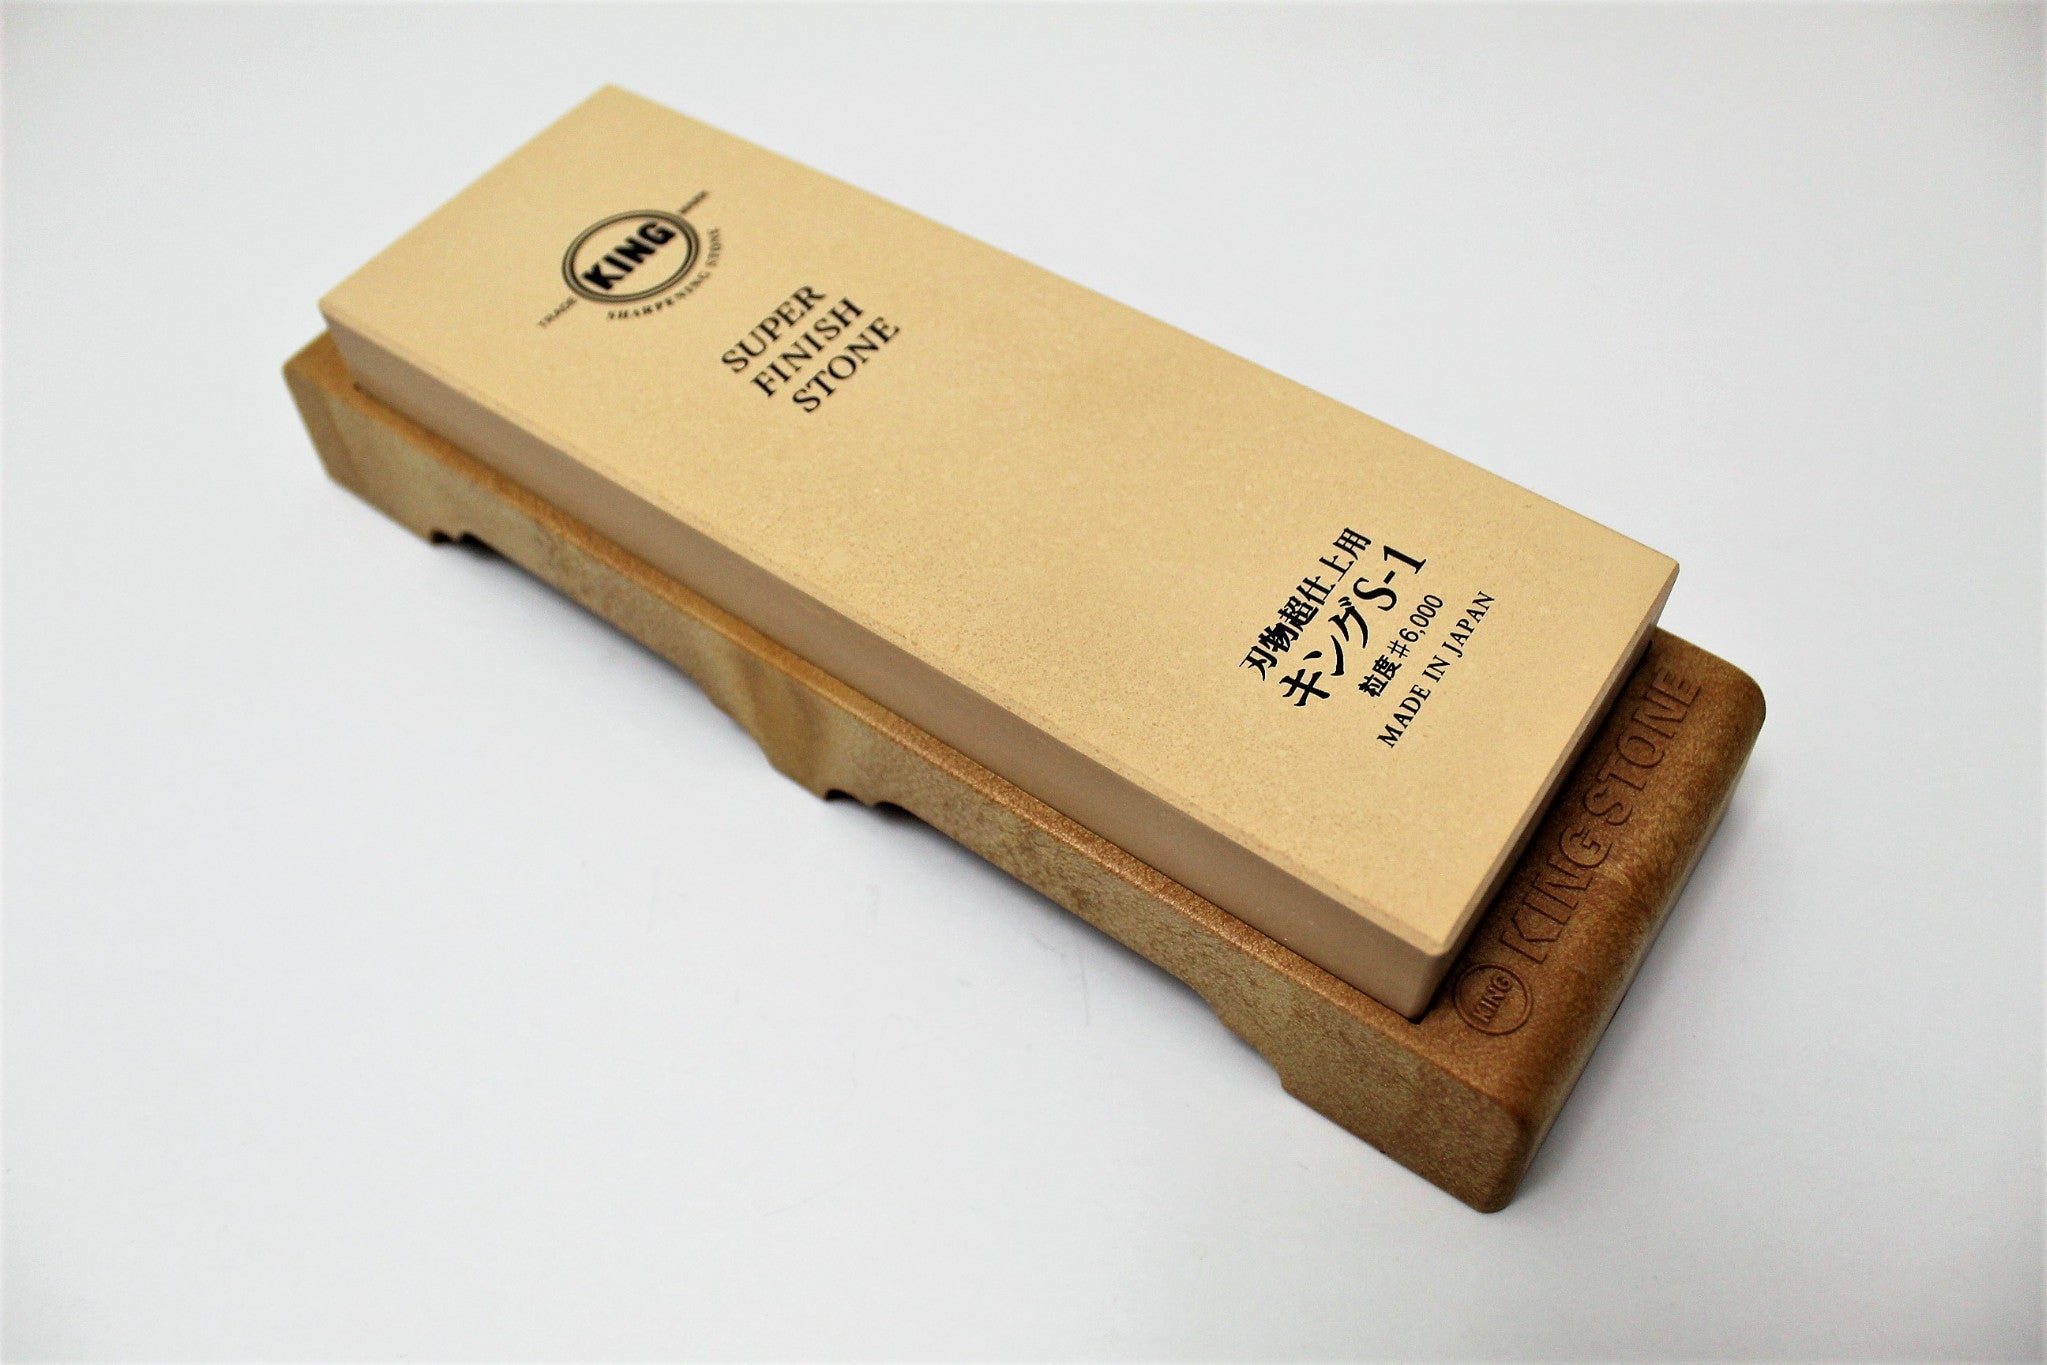 https://hasuseizo.com/cdn/shop/files/accessories-king-super-finish-japanese-sharpening-stone-with-base-grit-6000-s-1-3_5000x.jpg?v=1698704549